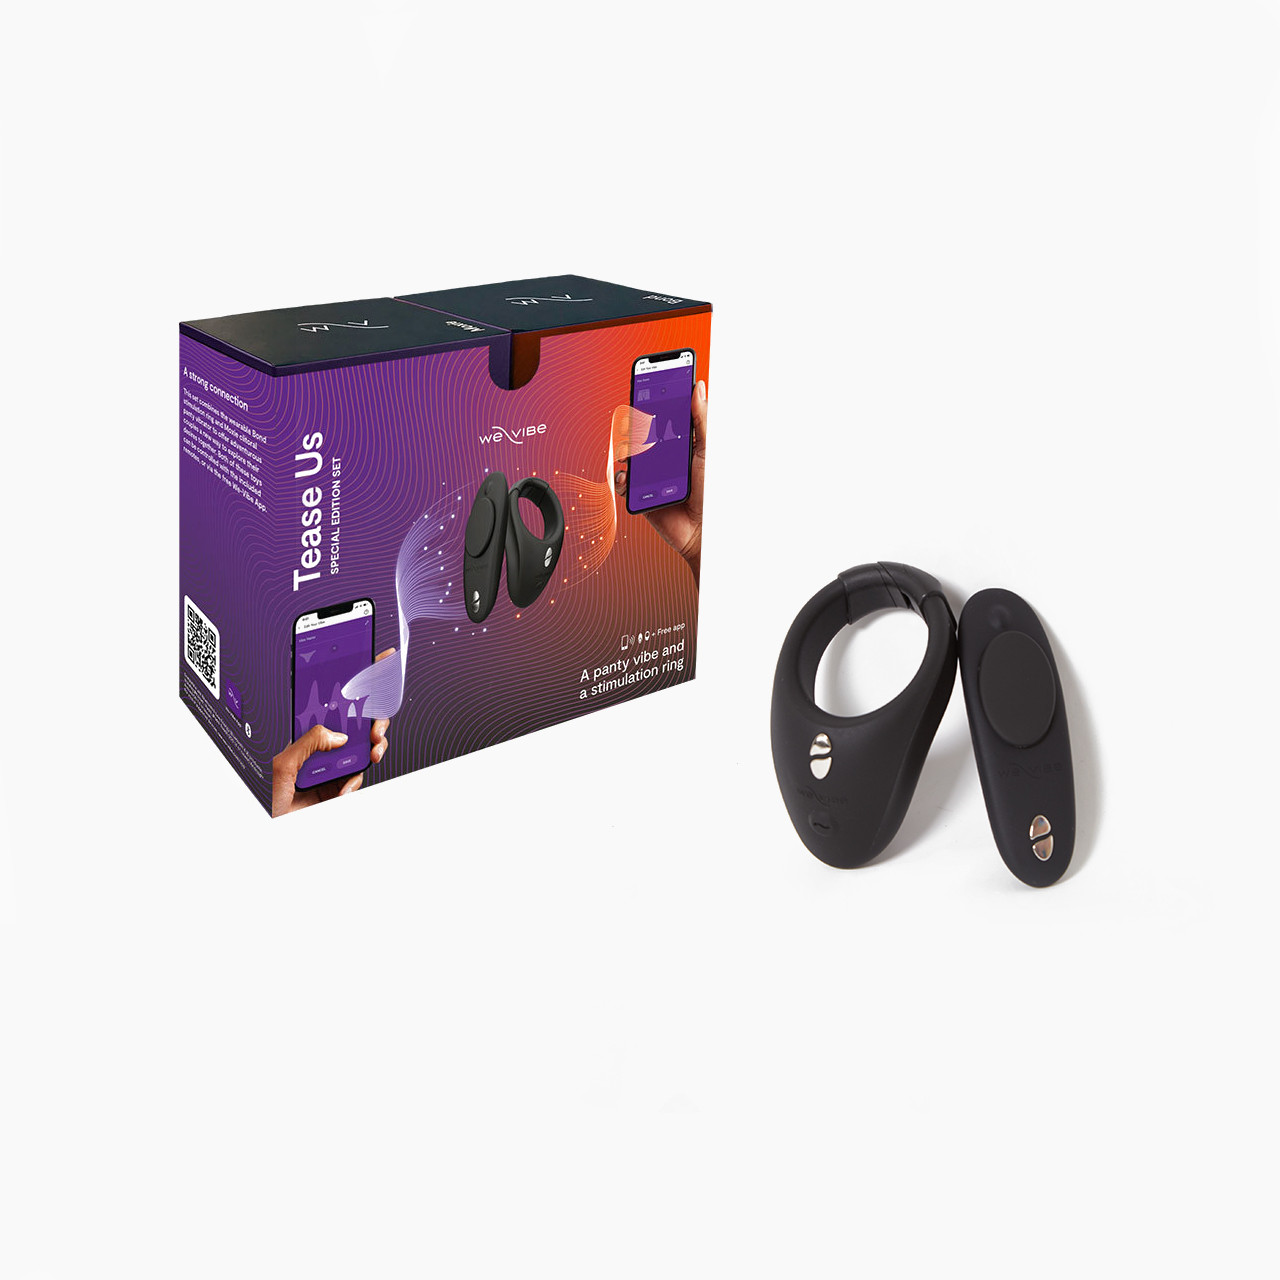 Tease Us Set with We-Vibe Bond and We-Vibe Moxie with packaging